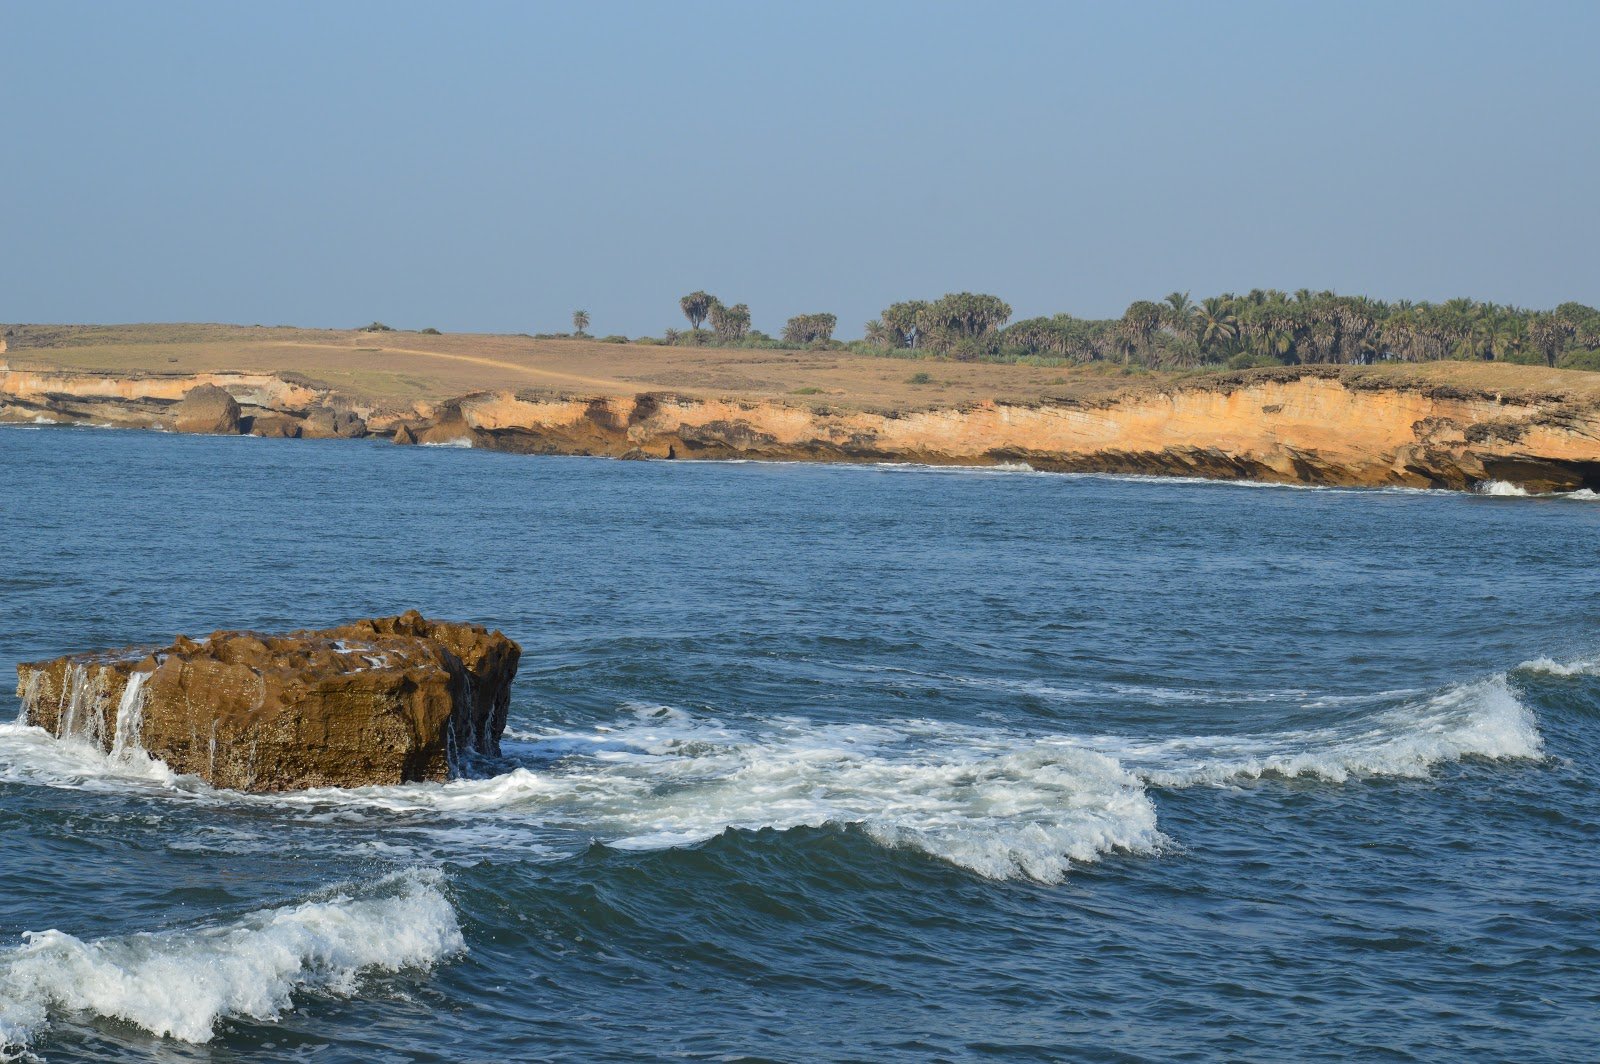 Day: 07 Diu – Somnath (90Kms/ approx. 2 hrs drive)